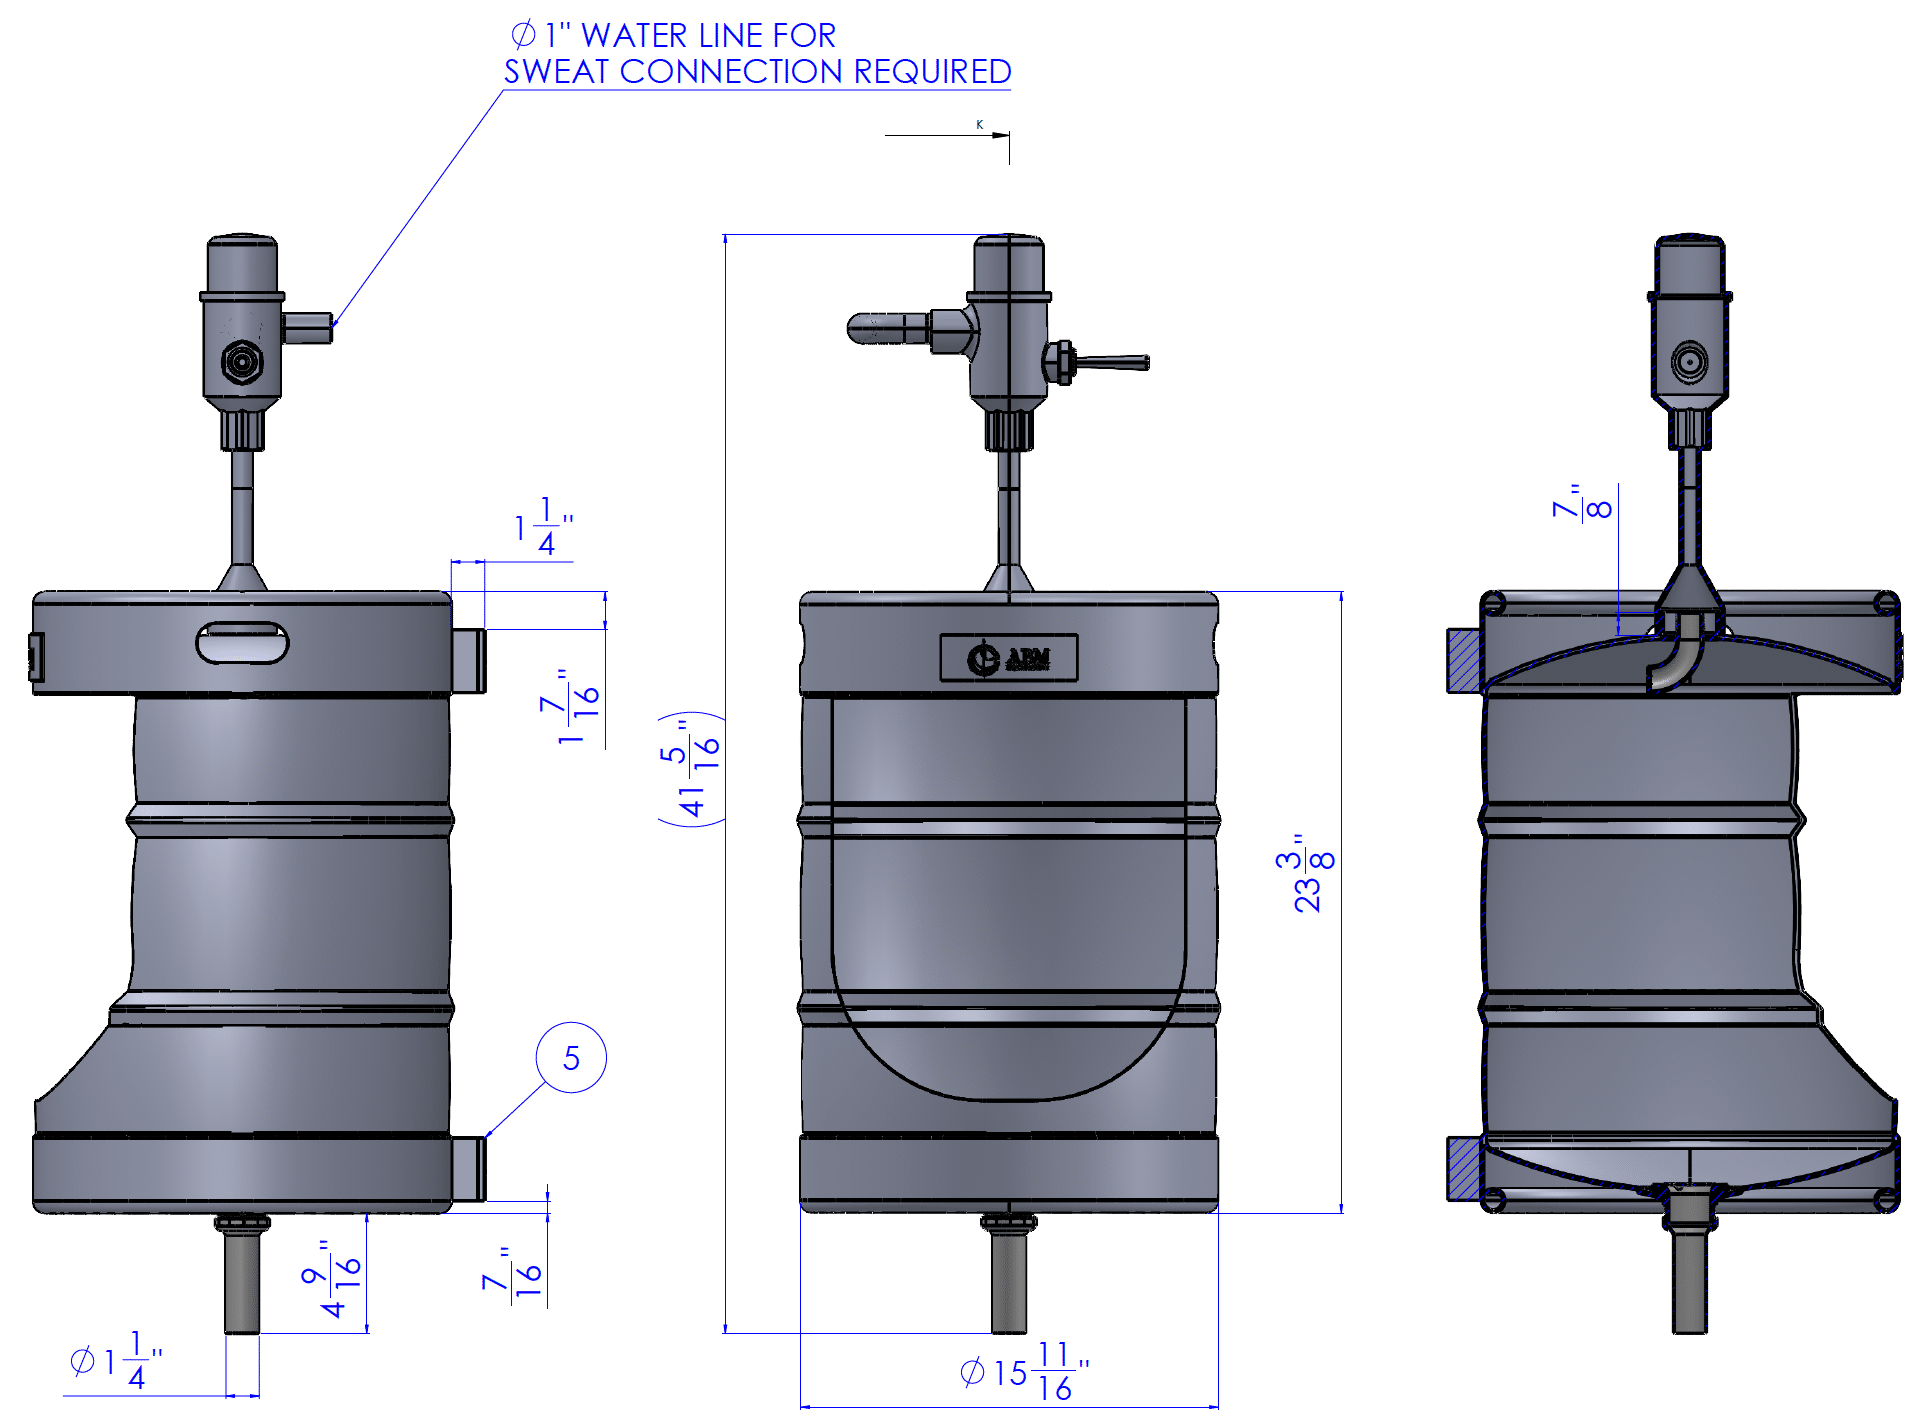 Keg urinal assembly drawing with dimensions